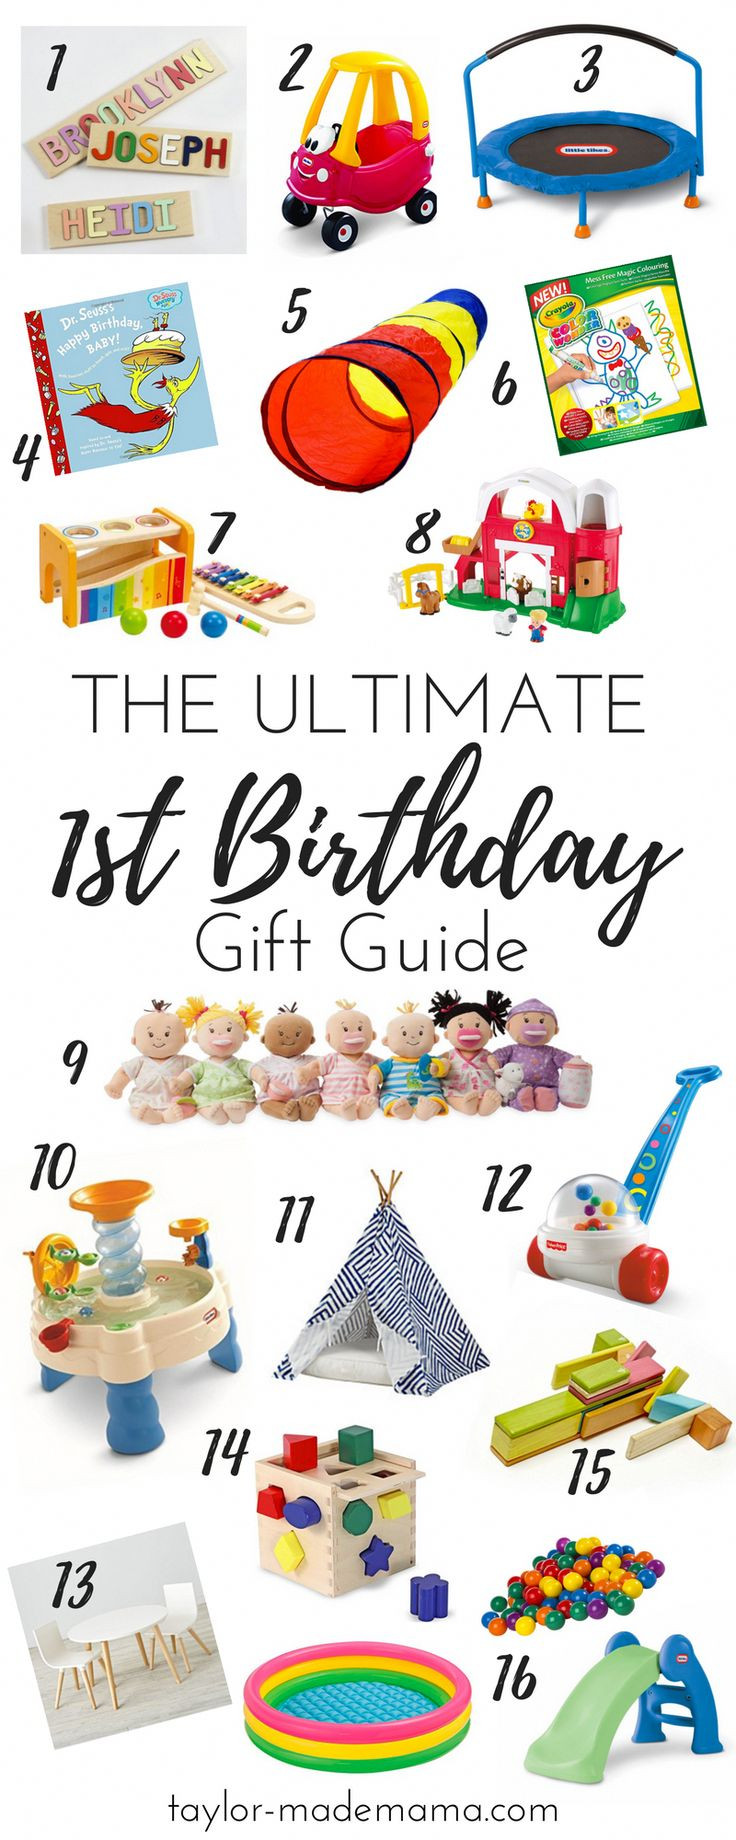 Baby'S First Birthday Gift Ideas For Her
 Our birthday surprise ideas for her can be found among our